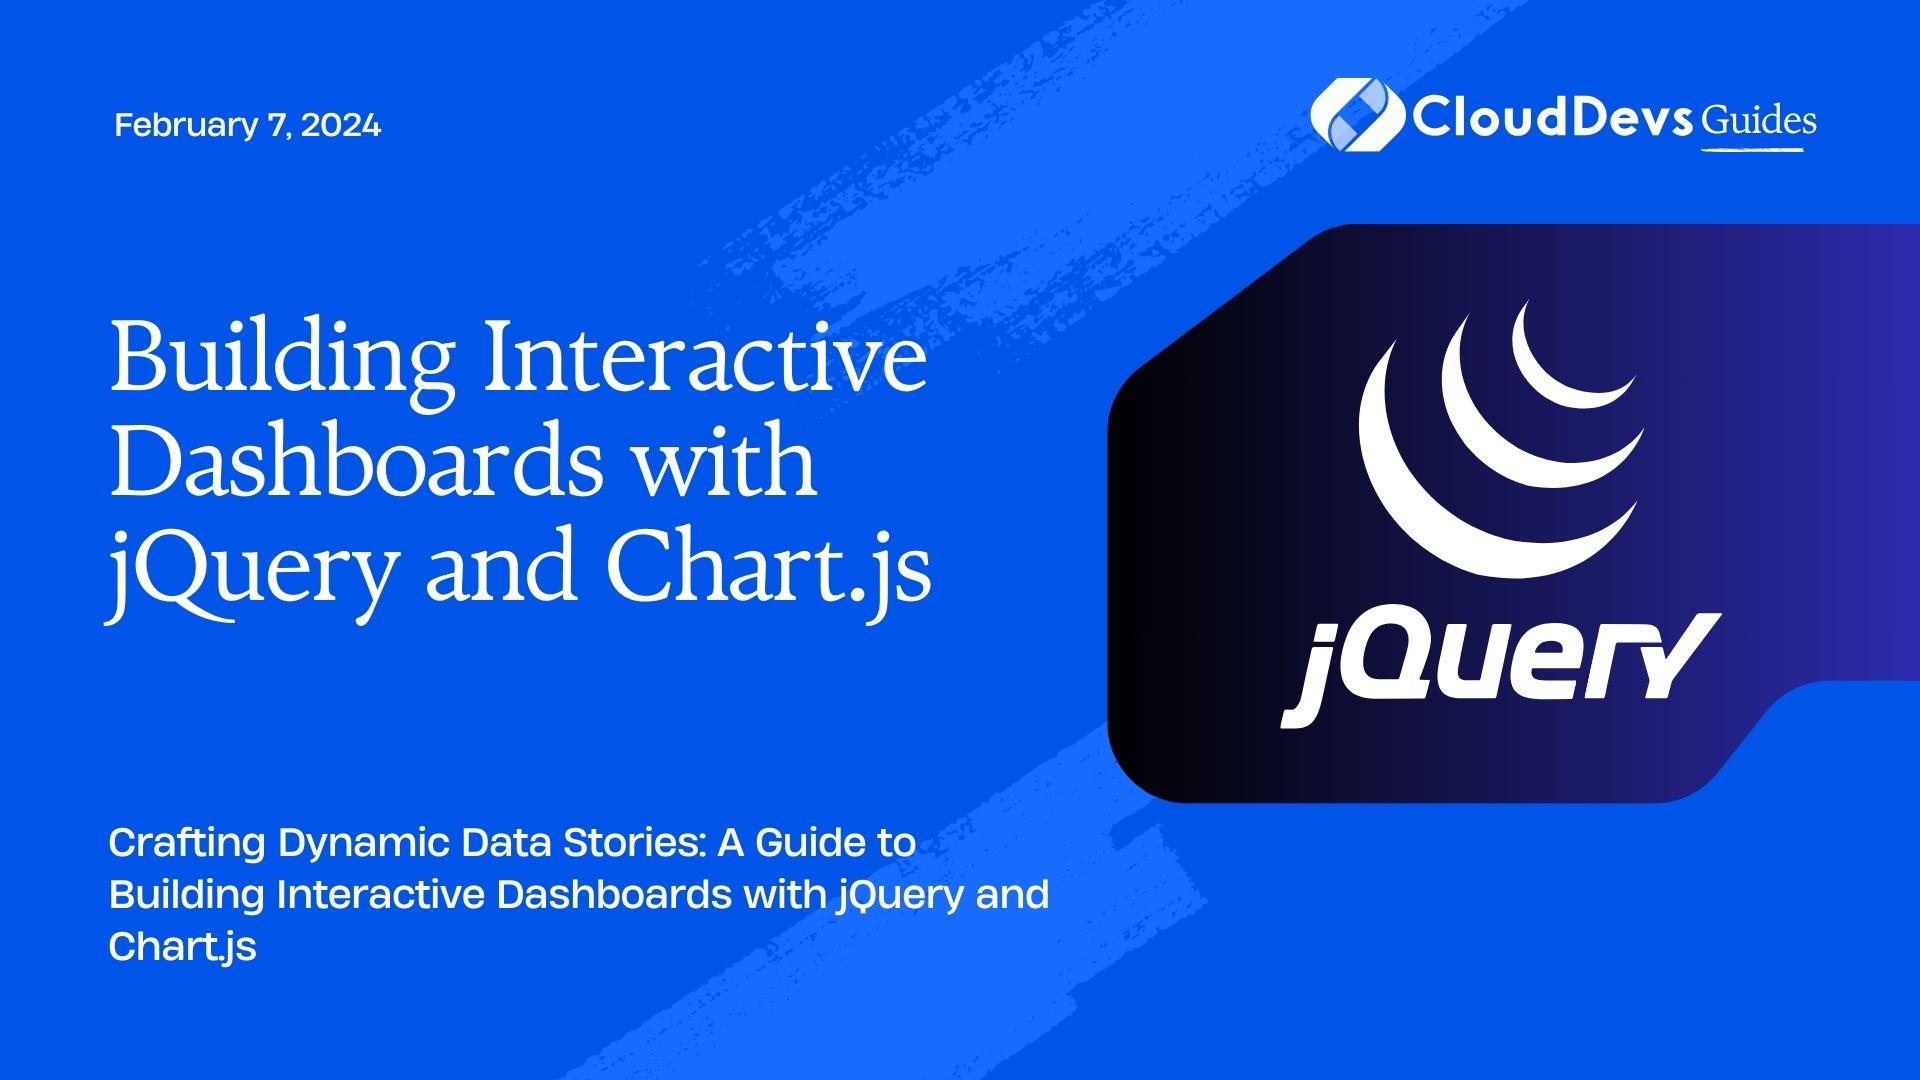 Building Interactive Dashboards with jQuery and Chart.js